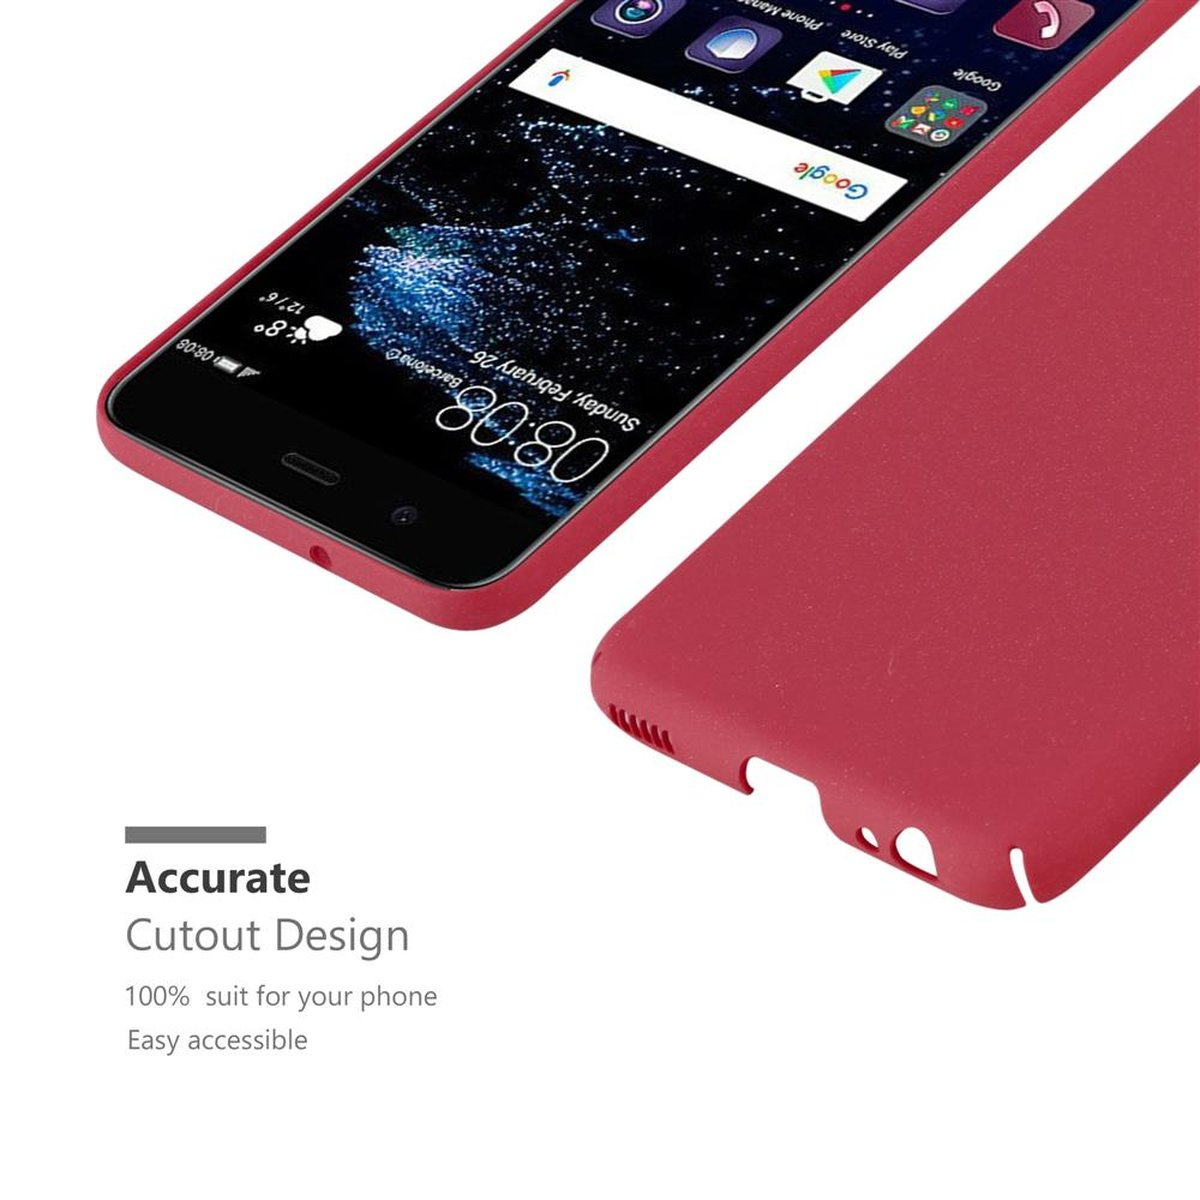 Backcover, Huawei, im ROT FROSTY P10, CADORABO Hard Frosty Hülle Style, Case